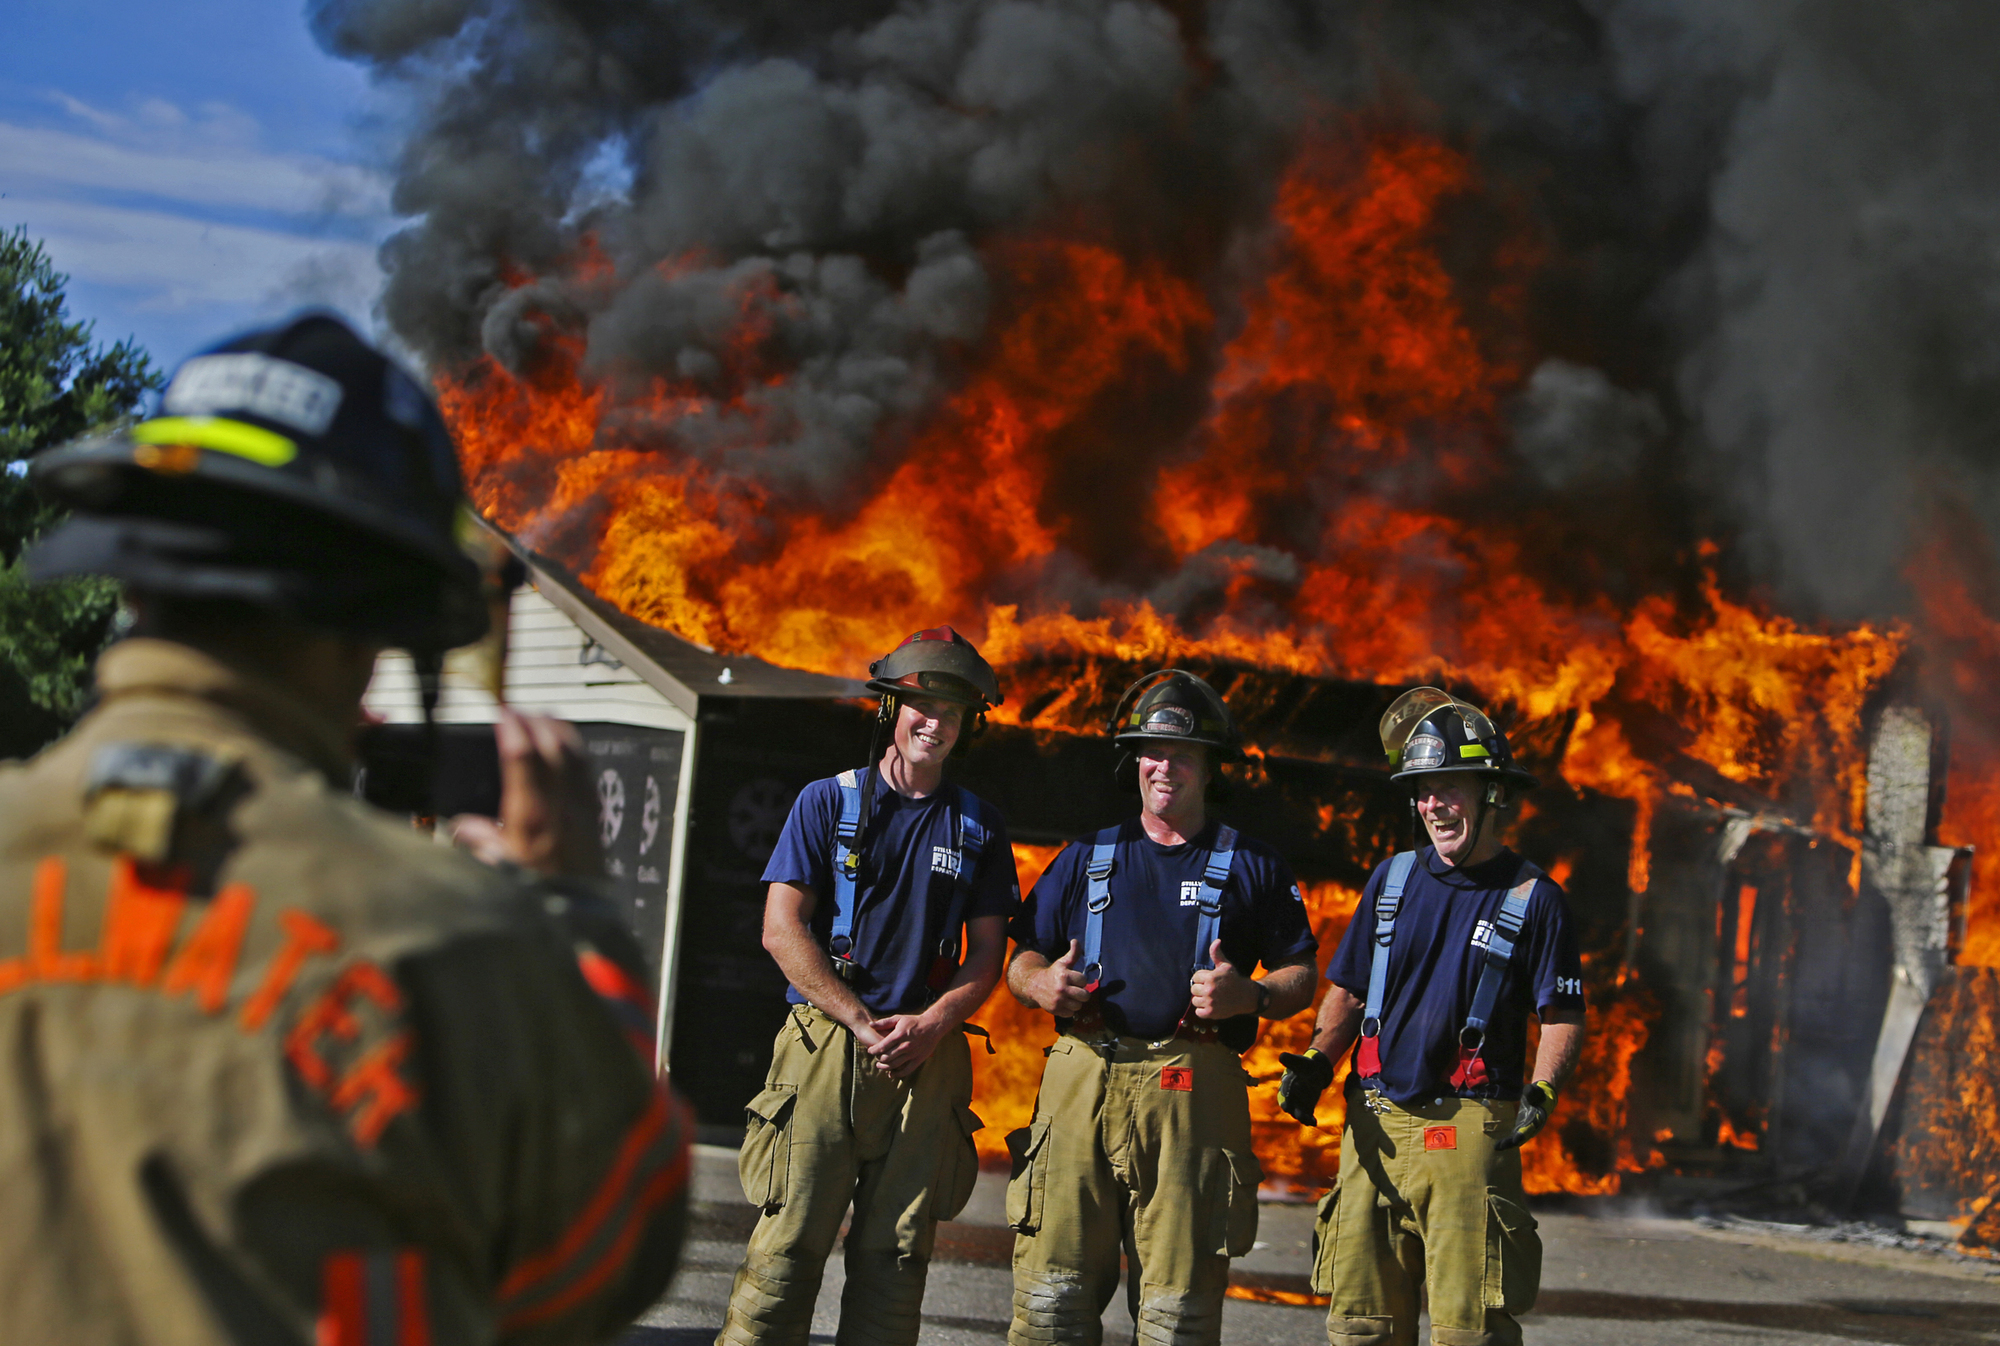 Heat is on across Minnesota for cities to keep firefighters ...